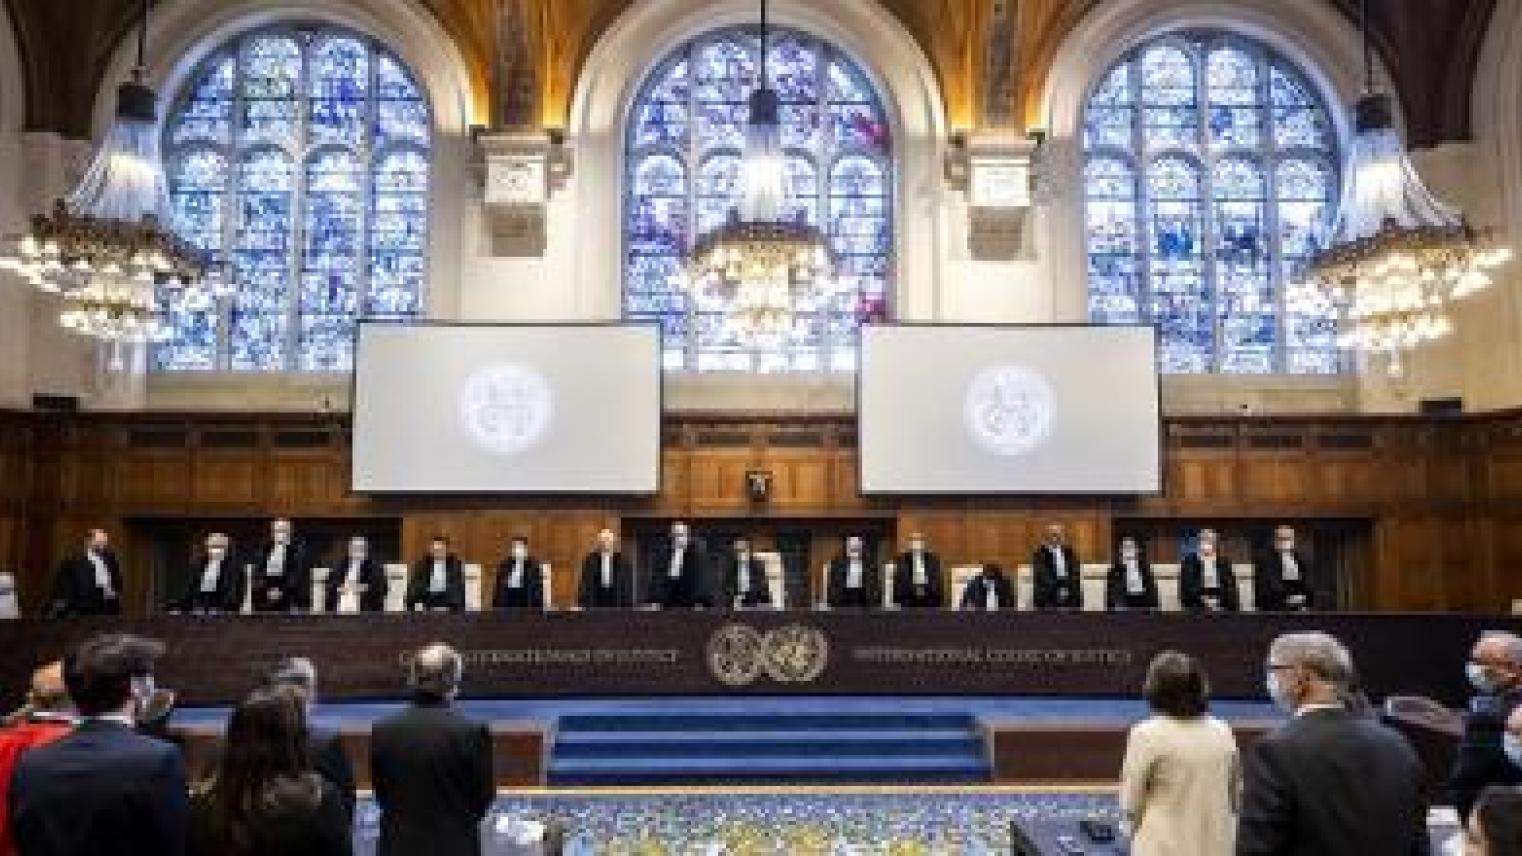 Image: View of the ICJ courtroom on 1 December 2022, at the reading of the Judgement of the Court in the Dispute over the Status and Use of the Waters of the Silala (Chile v. Bolivia), from the ICJ website (free to use for educational institutions per ICJ